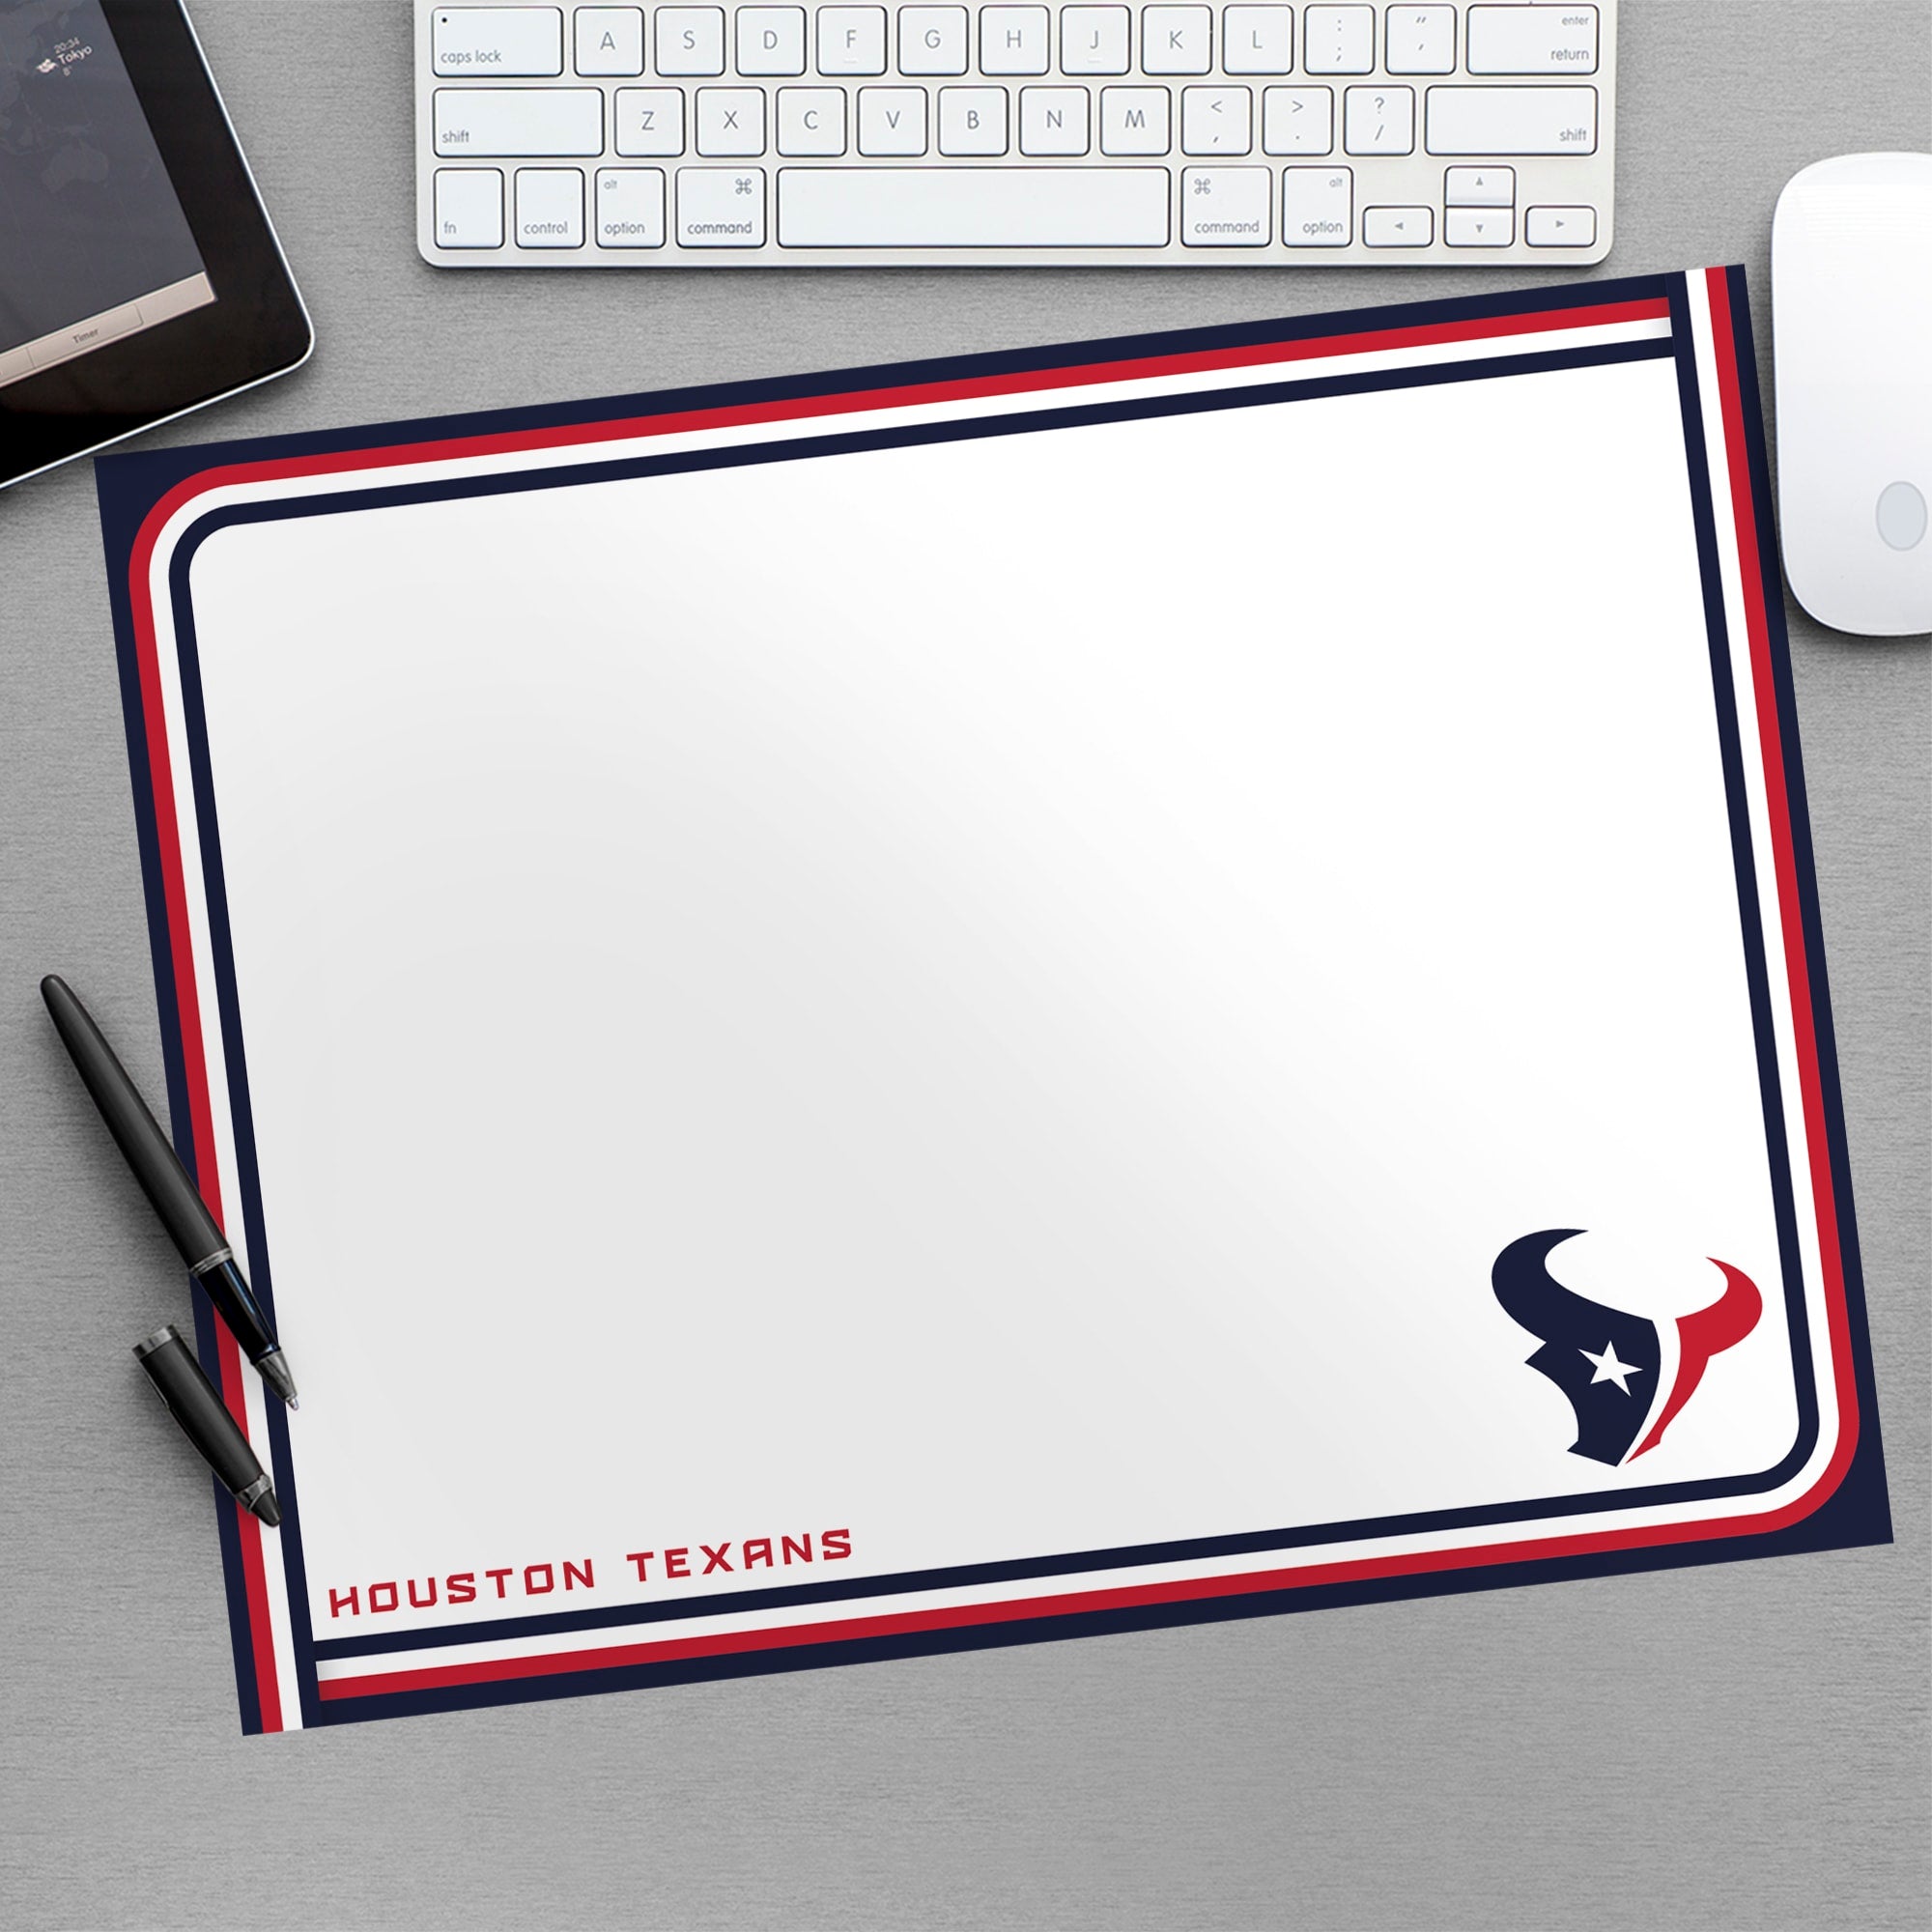 Houston Texans: Dry Erase Whiteboard - Officially Licensed NFL Removable Wall Decal Large by Fathead | Vinyl